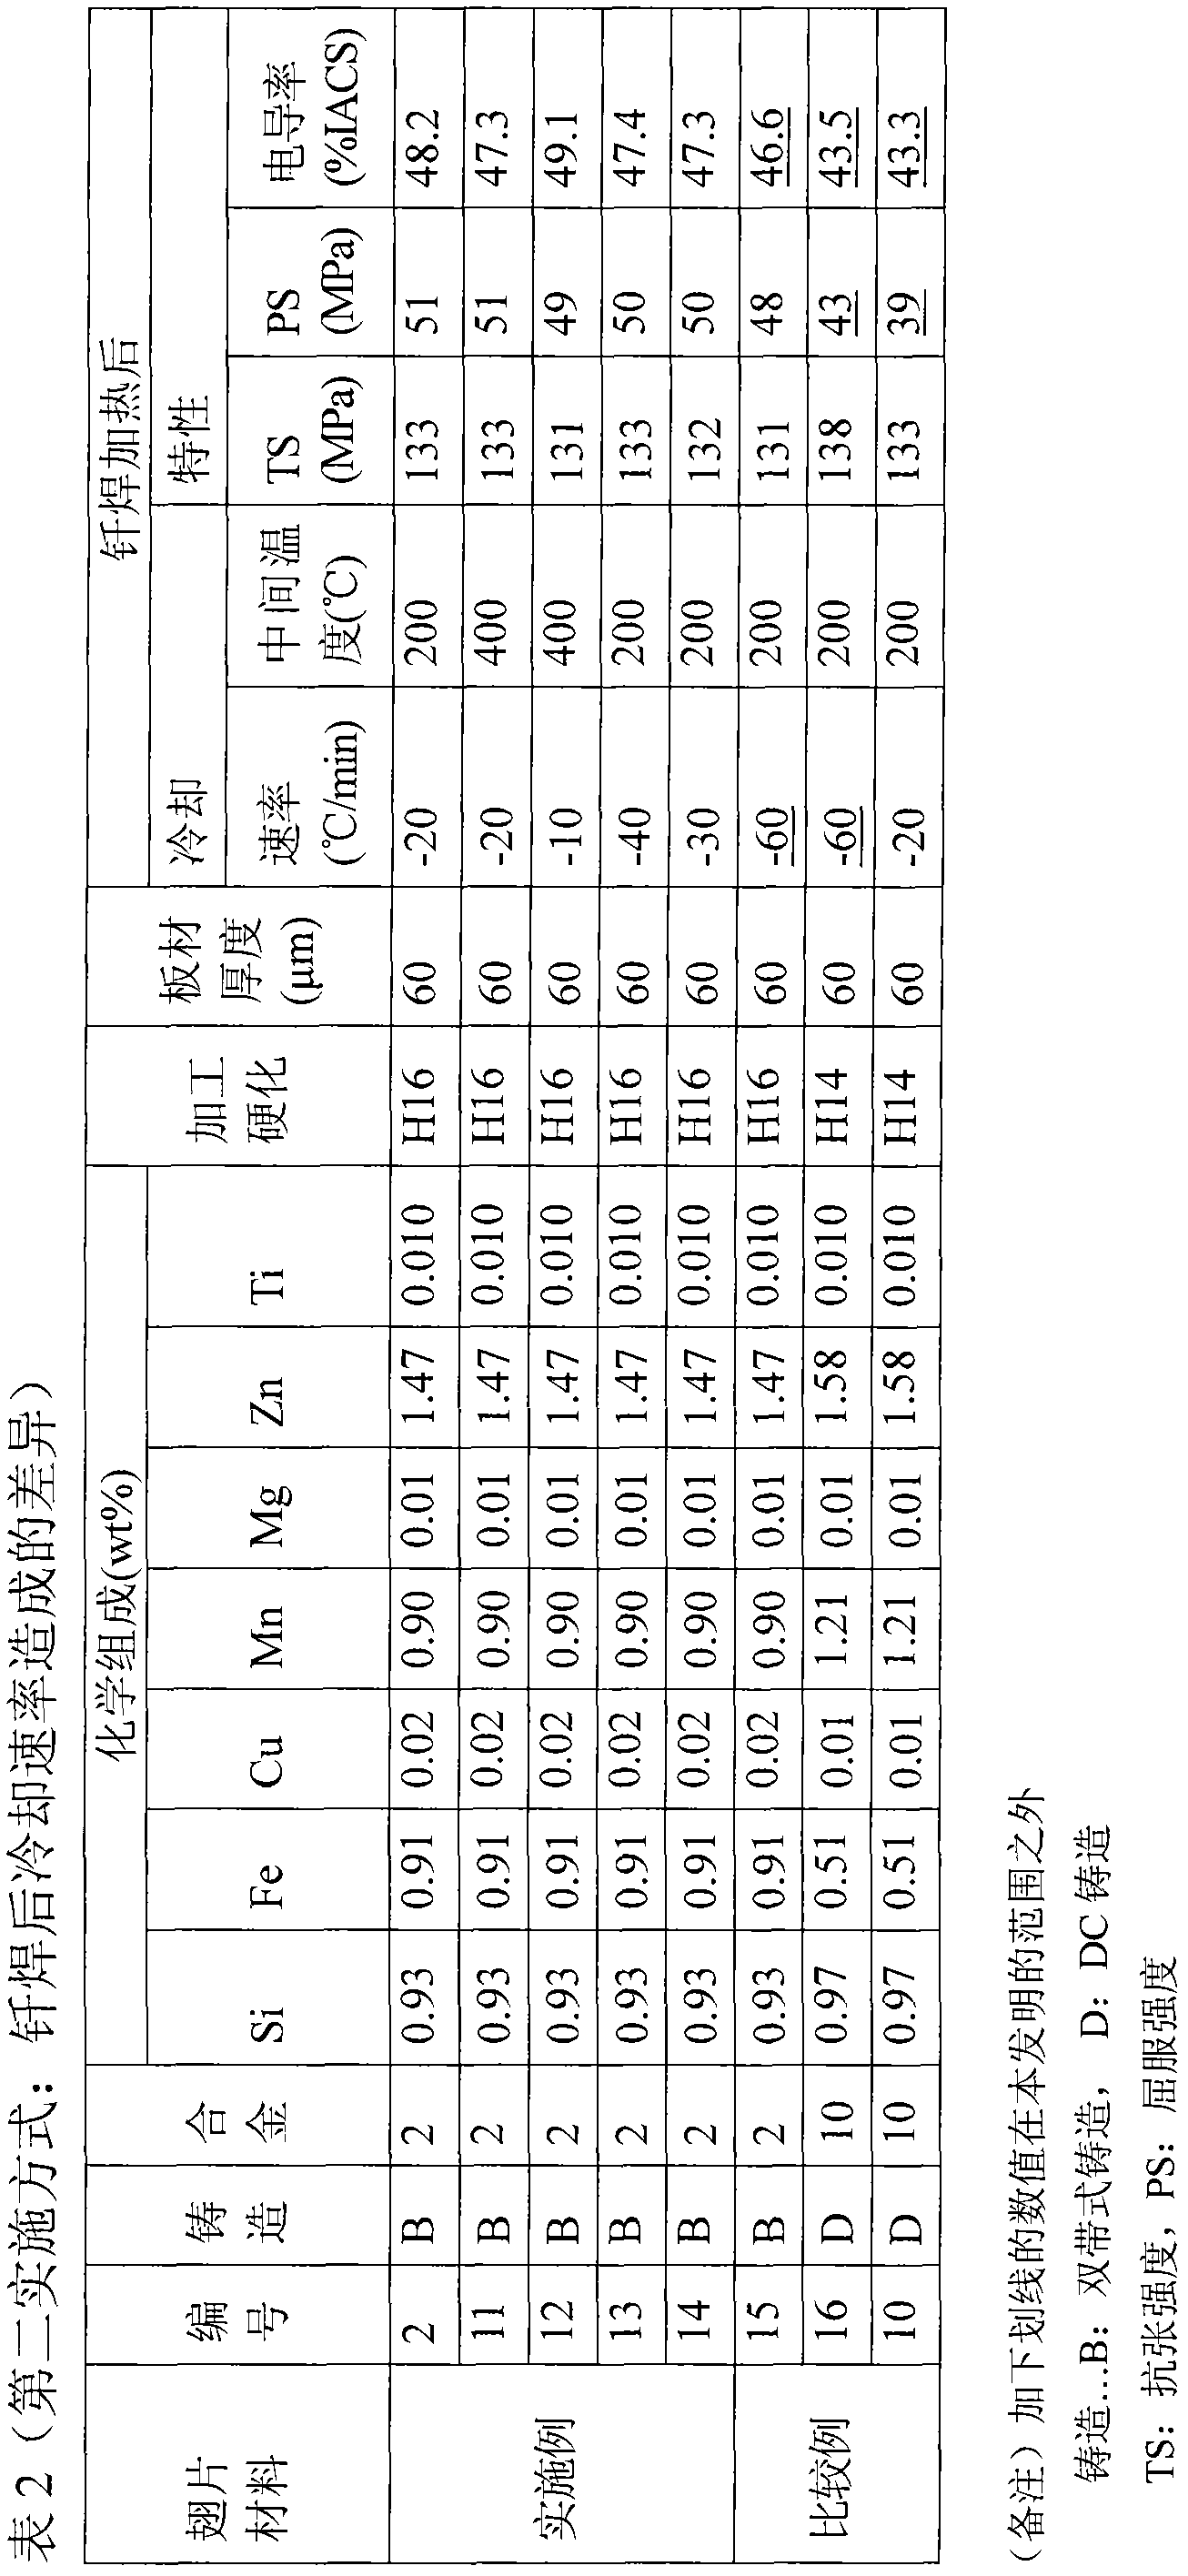 Aluminum alloy fin material for heat exchanger and method ofproduction of same and method of production of heat exchanger by brazing fin material